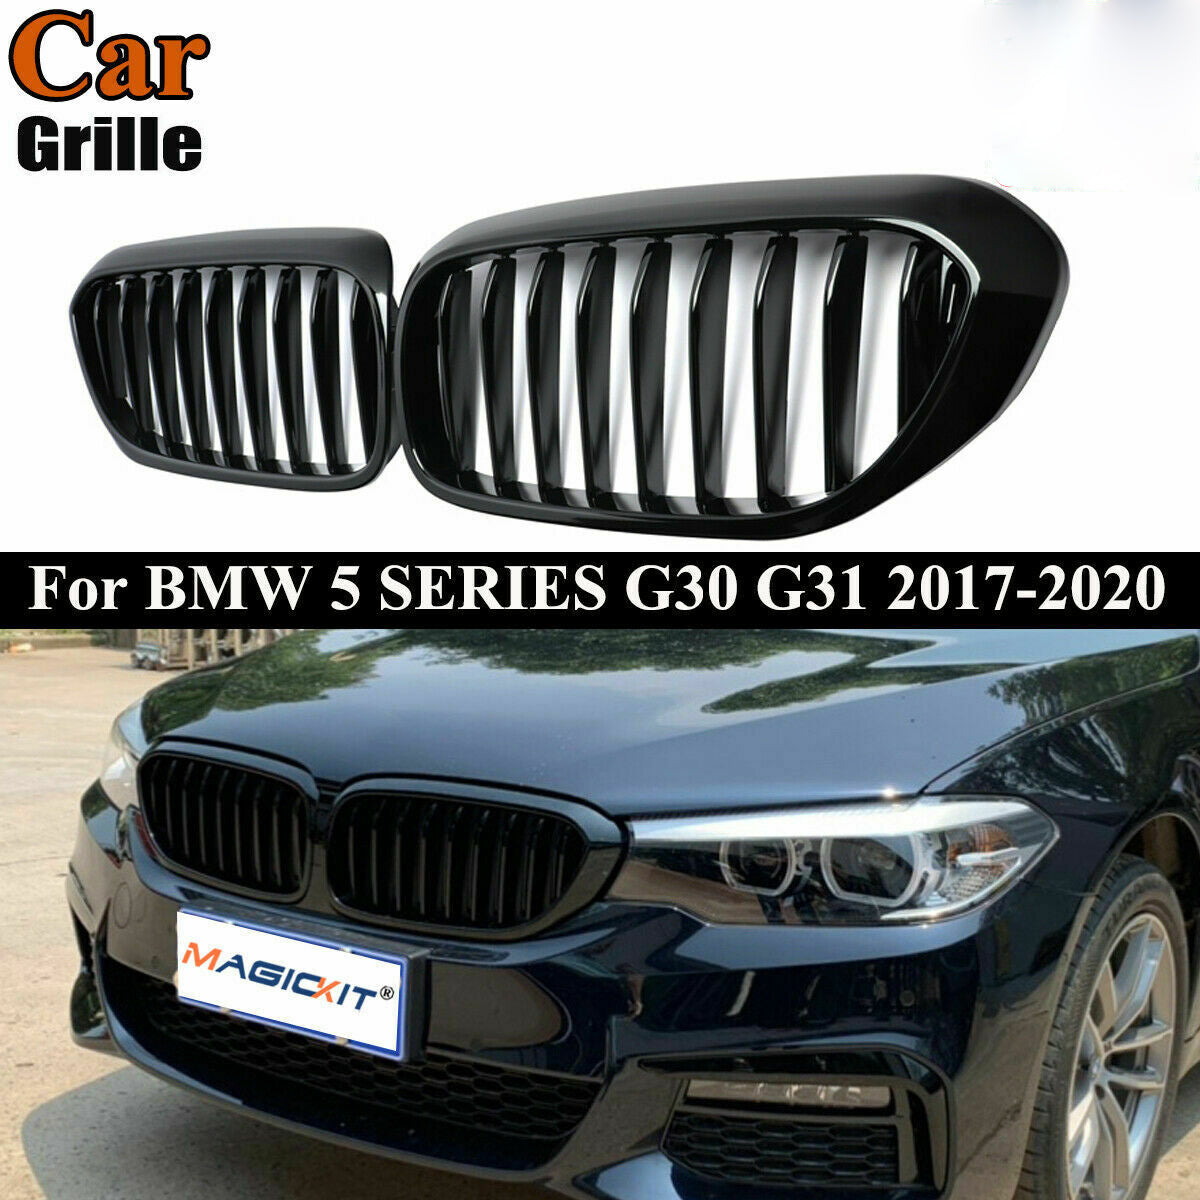 For BMW 5 Series G30 G38 2018-2020 Gloss Black Front Kidney Bumper Grille Grill